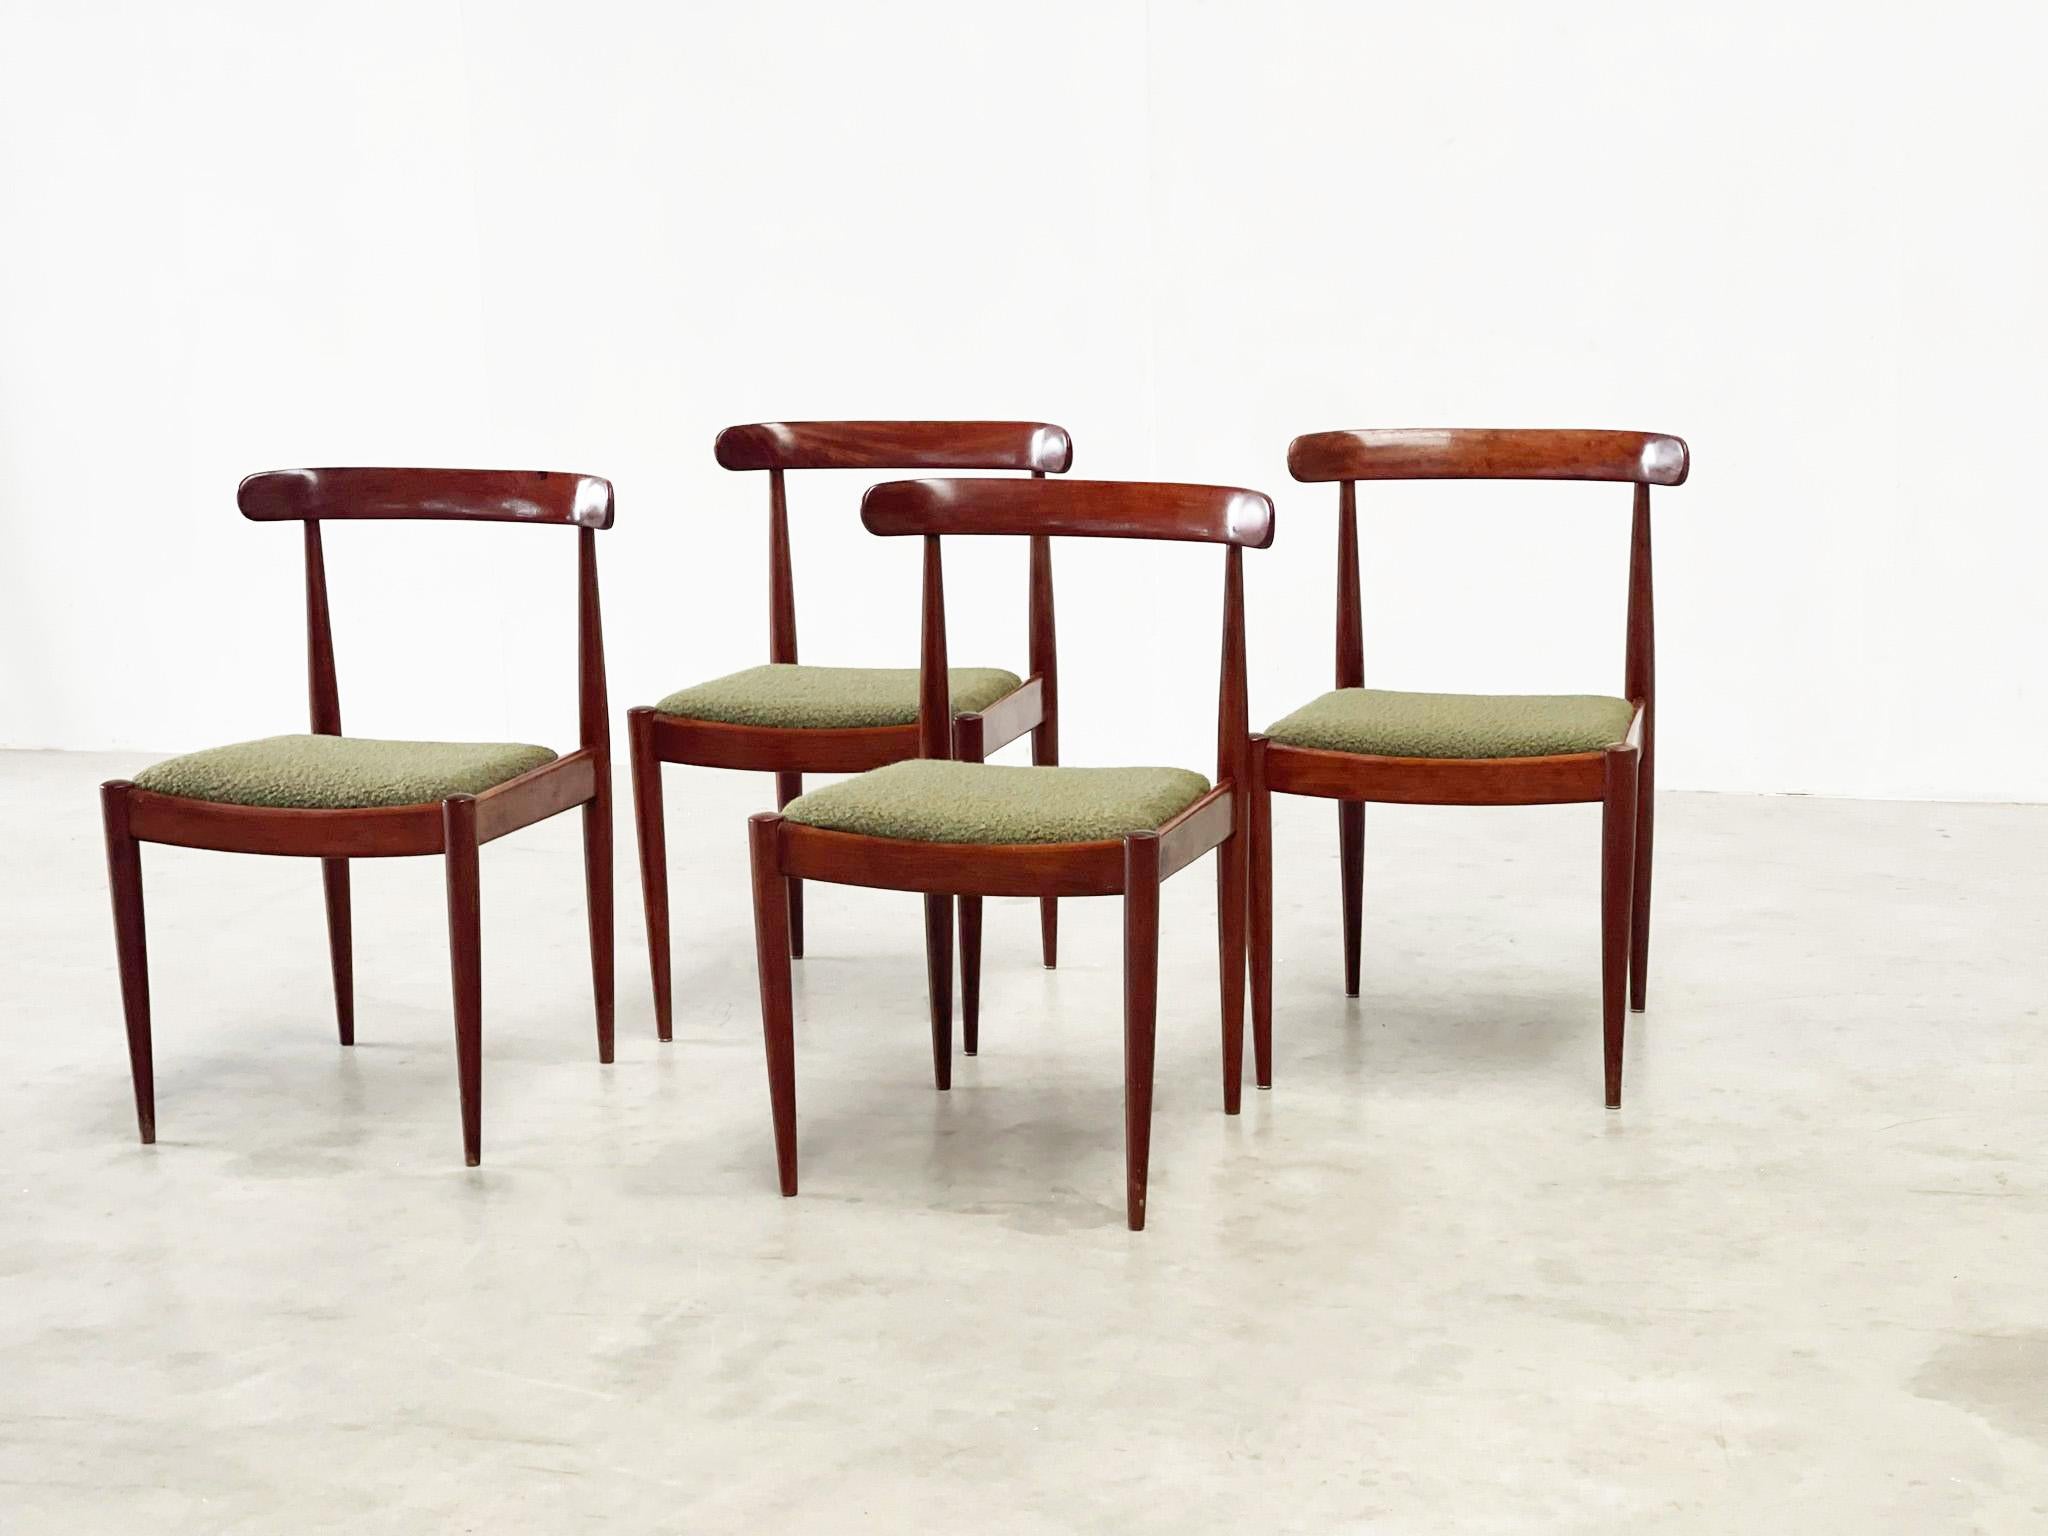 4 wooden dining chairs by Alfred Hendrickx 1